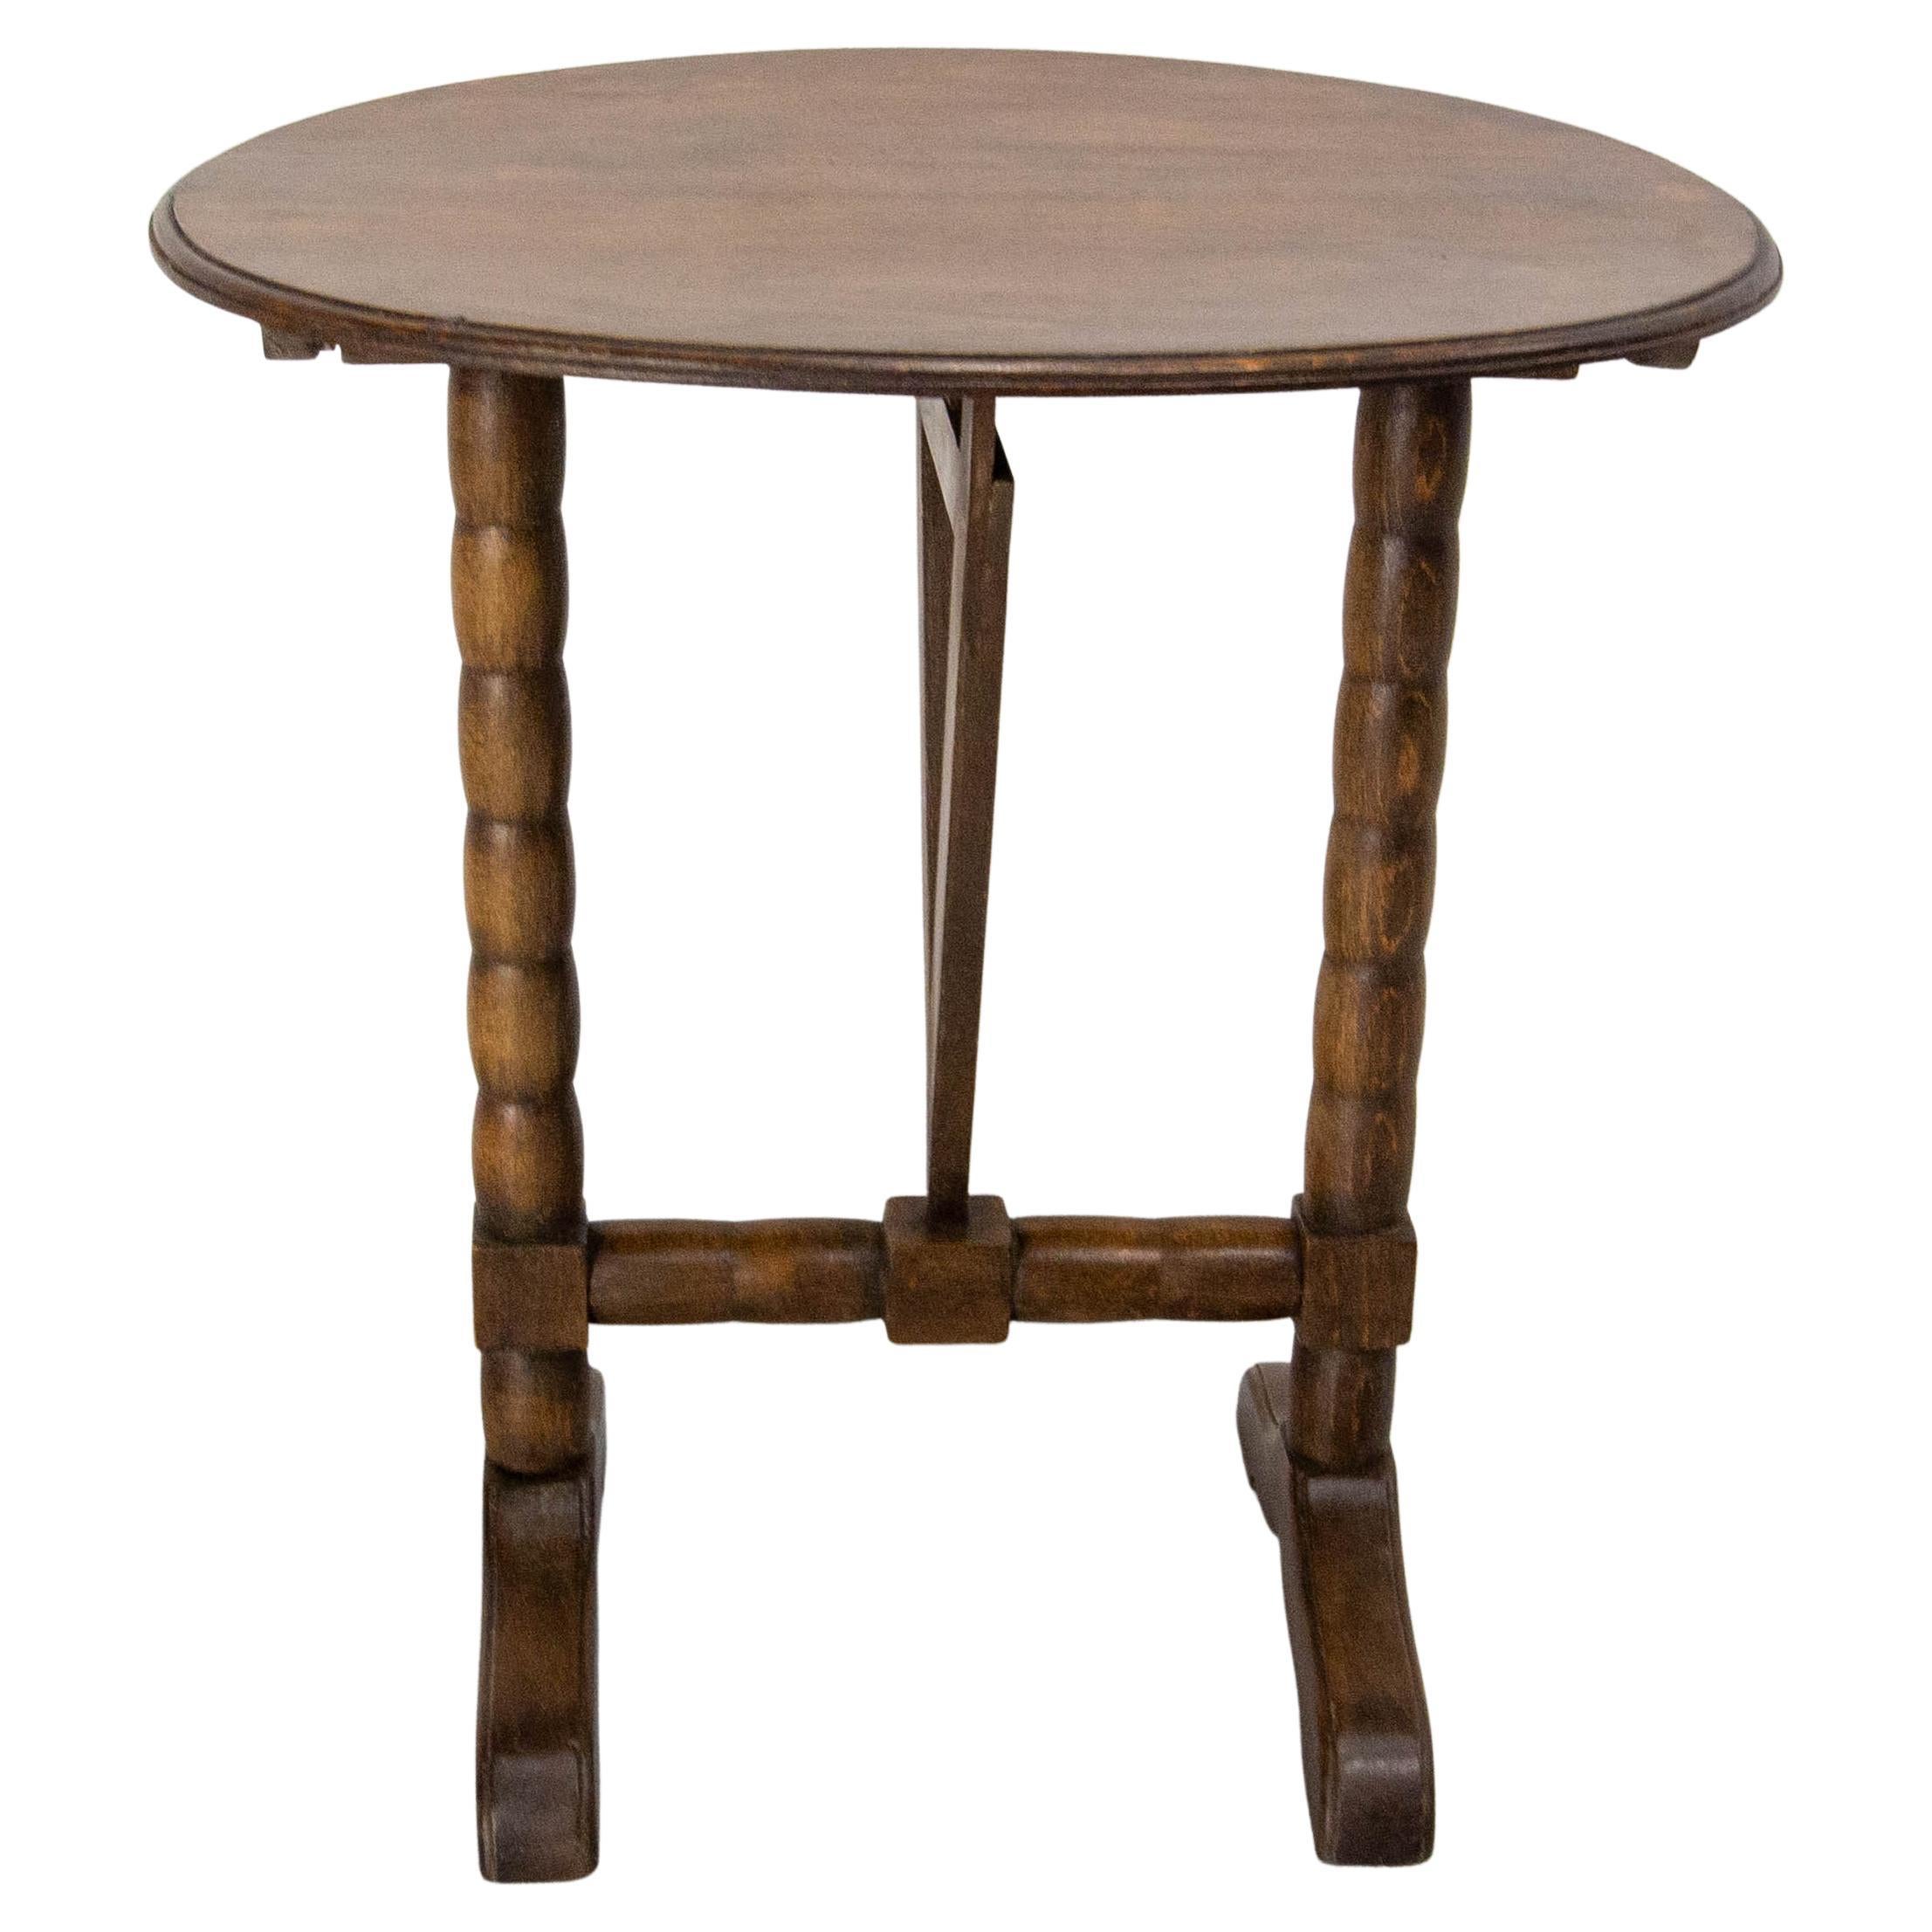 French poplar little table made in the mid-20th century on the model on a vineyard's table. The 